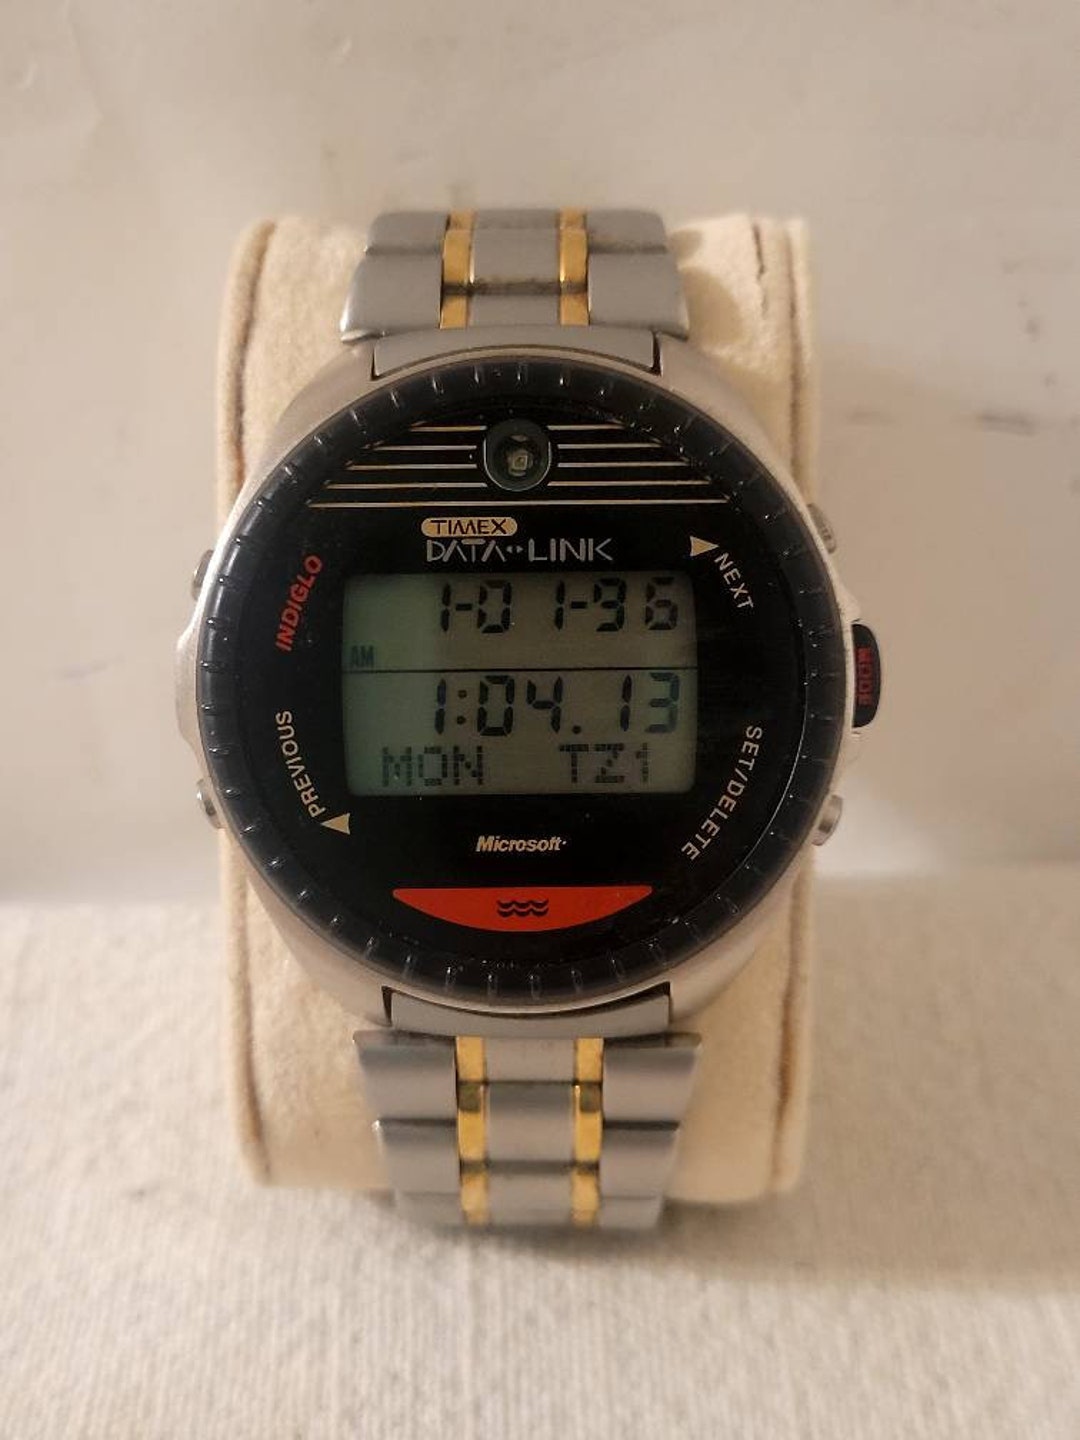 TIMEX Microsoft Data Link 150 Indiglo LCD Watch - Etsy